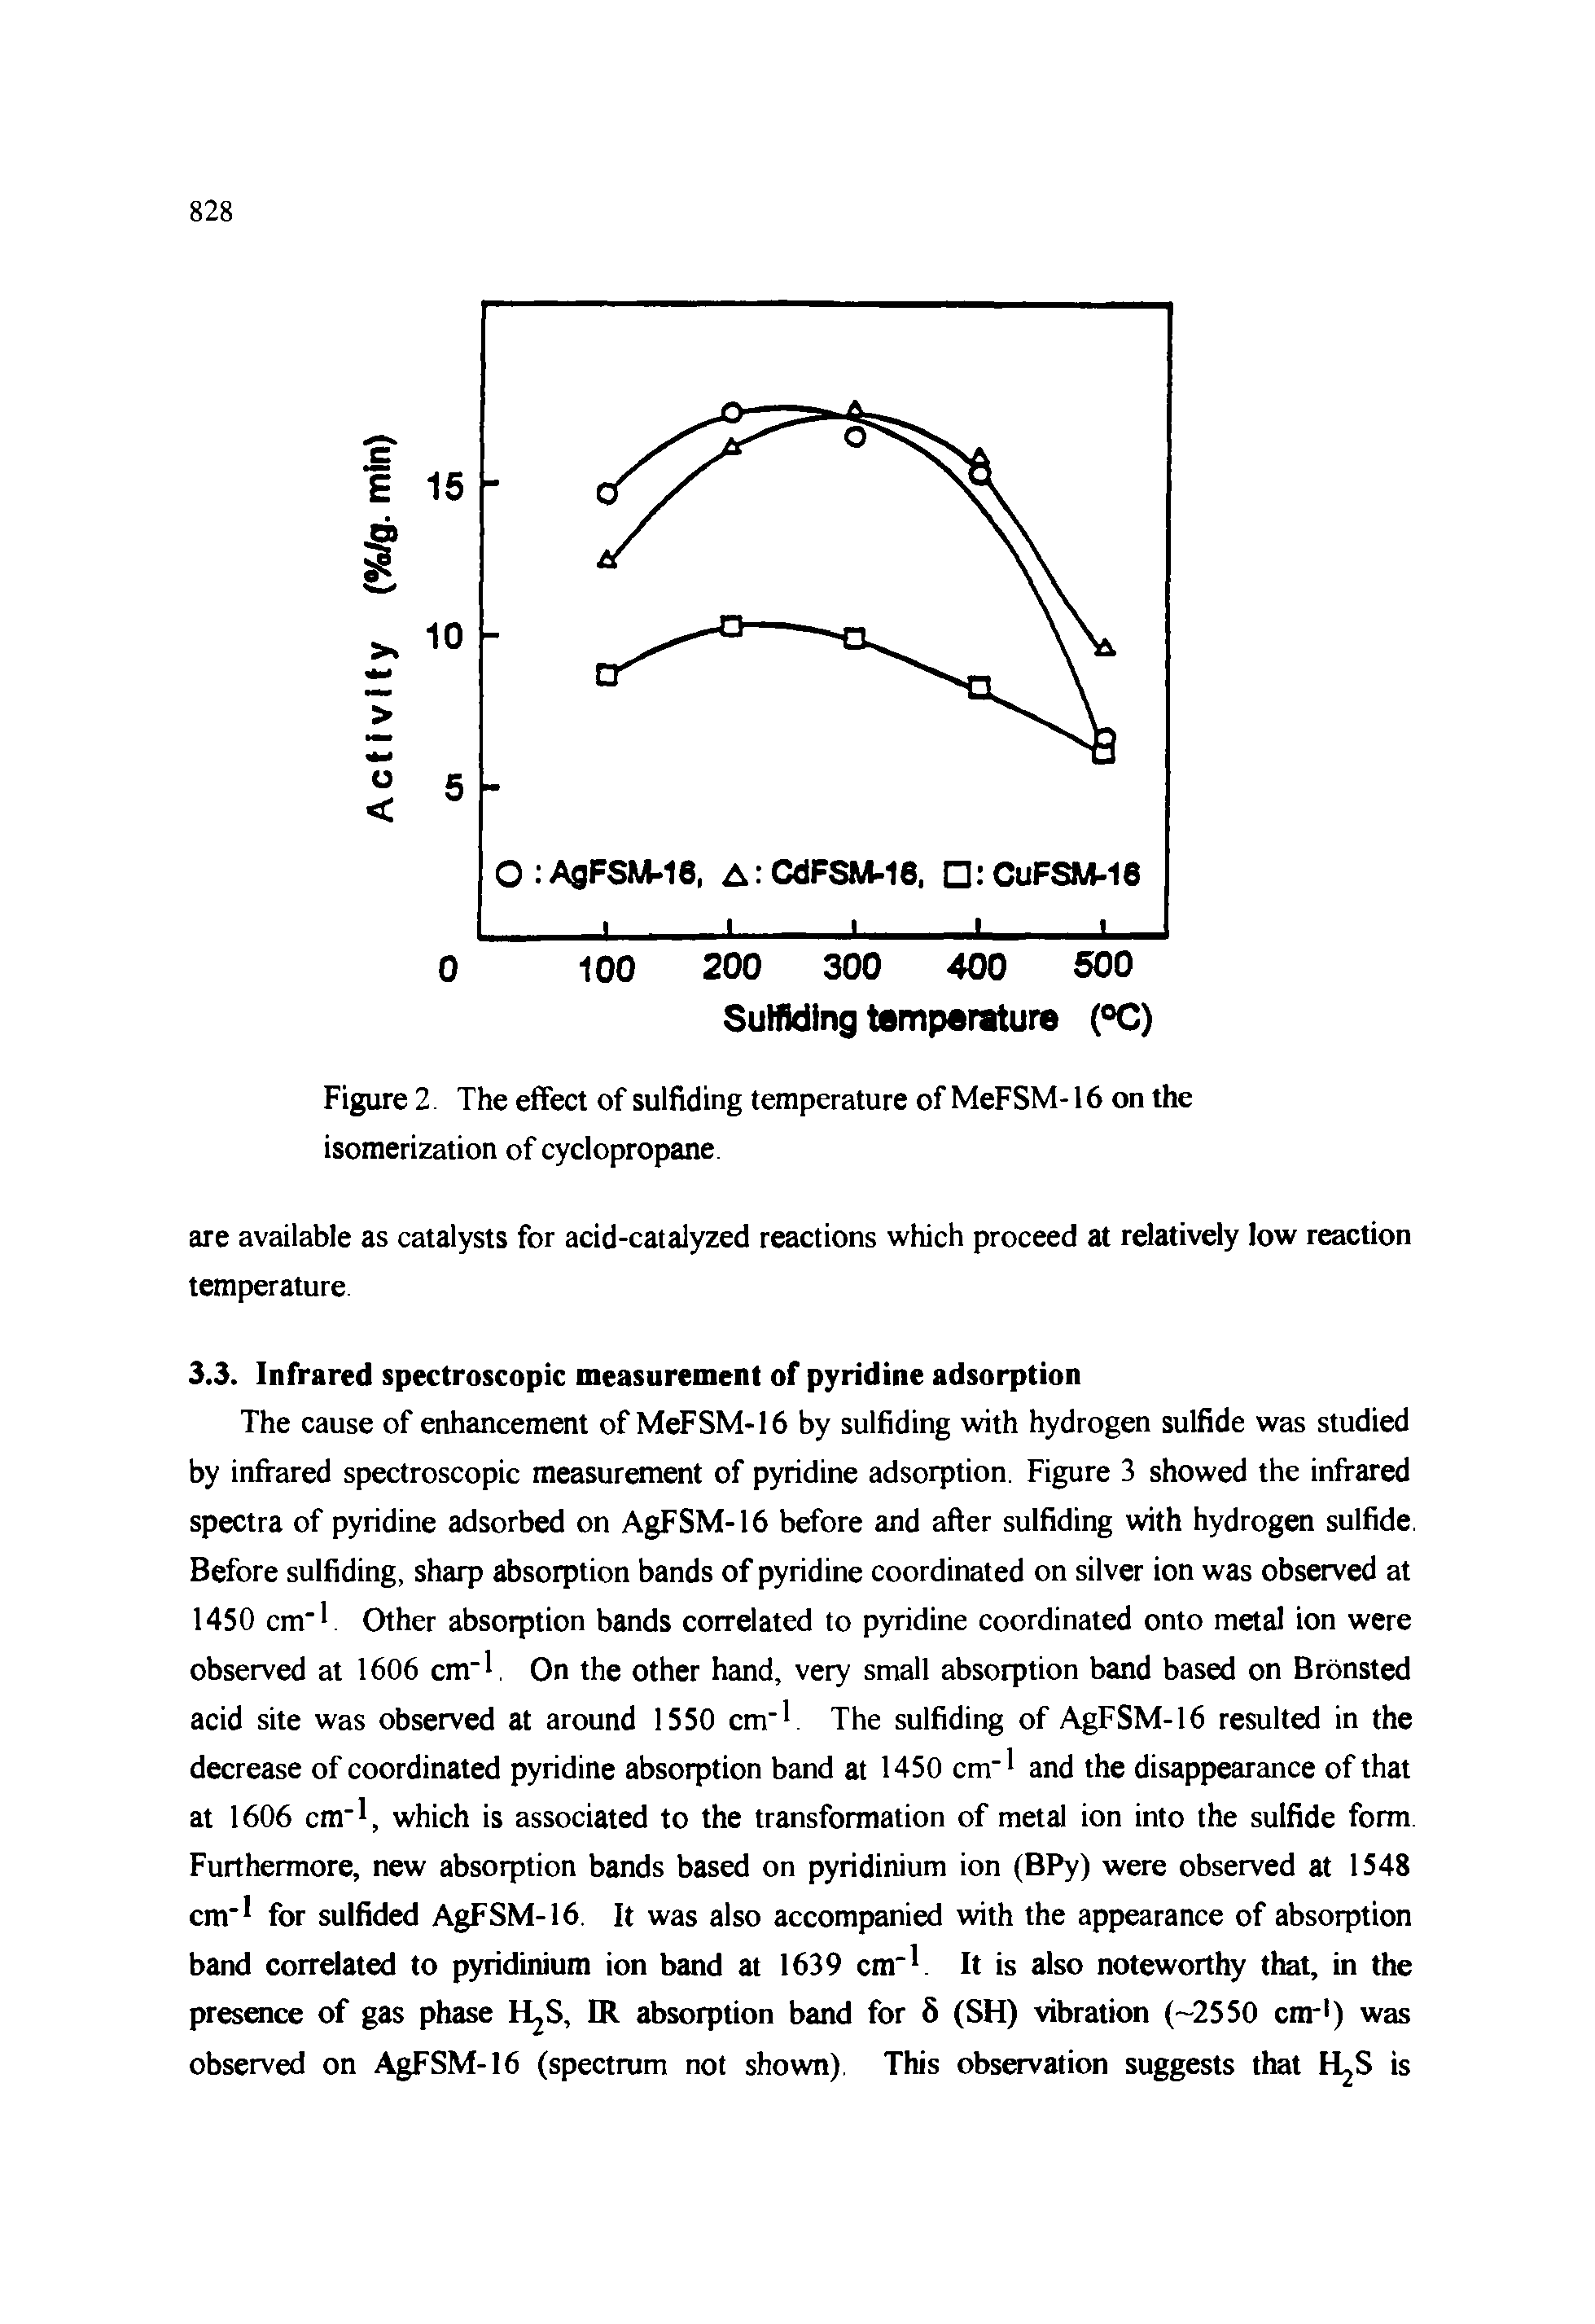 Figure 2. The effect of sulfiding temperature of MeFSM-16 on the isomerization of cyclopropane.